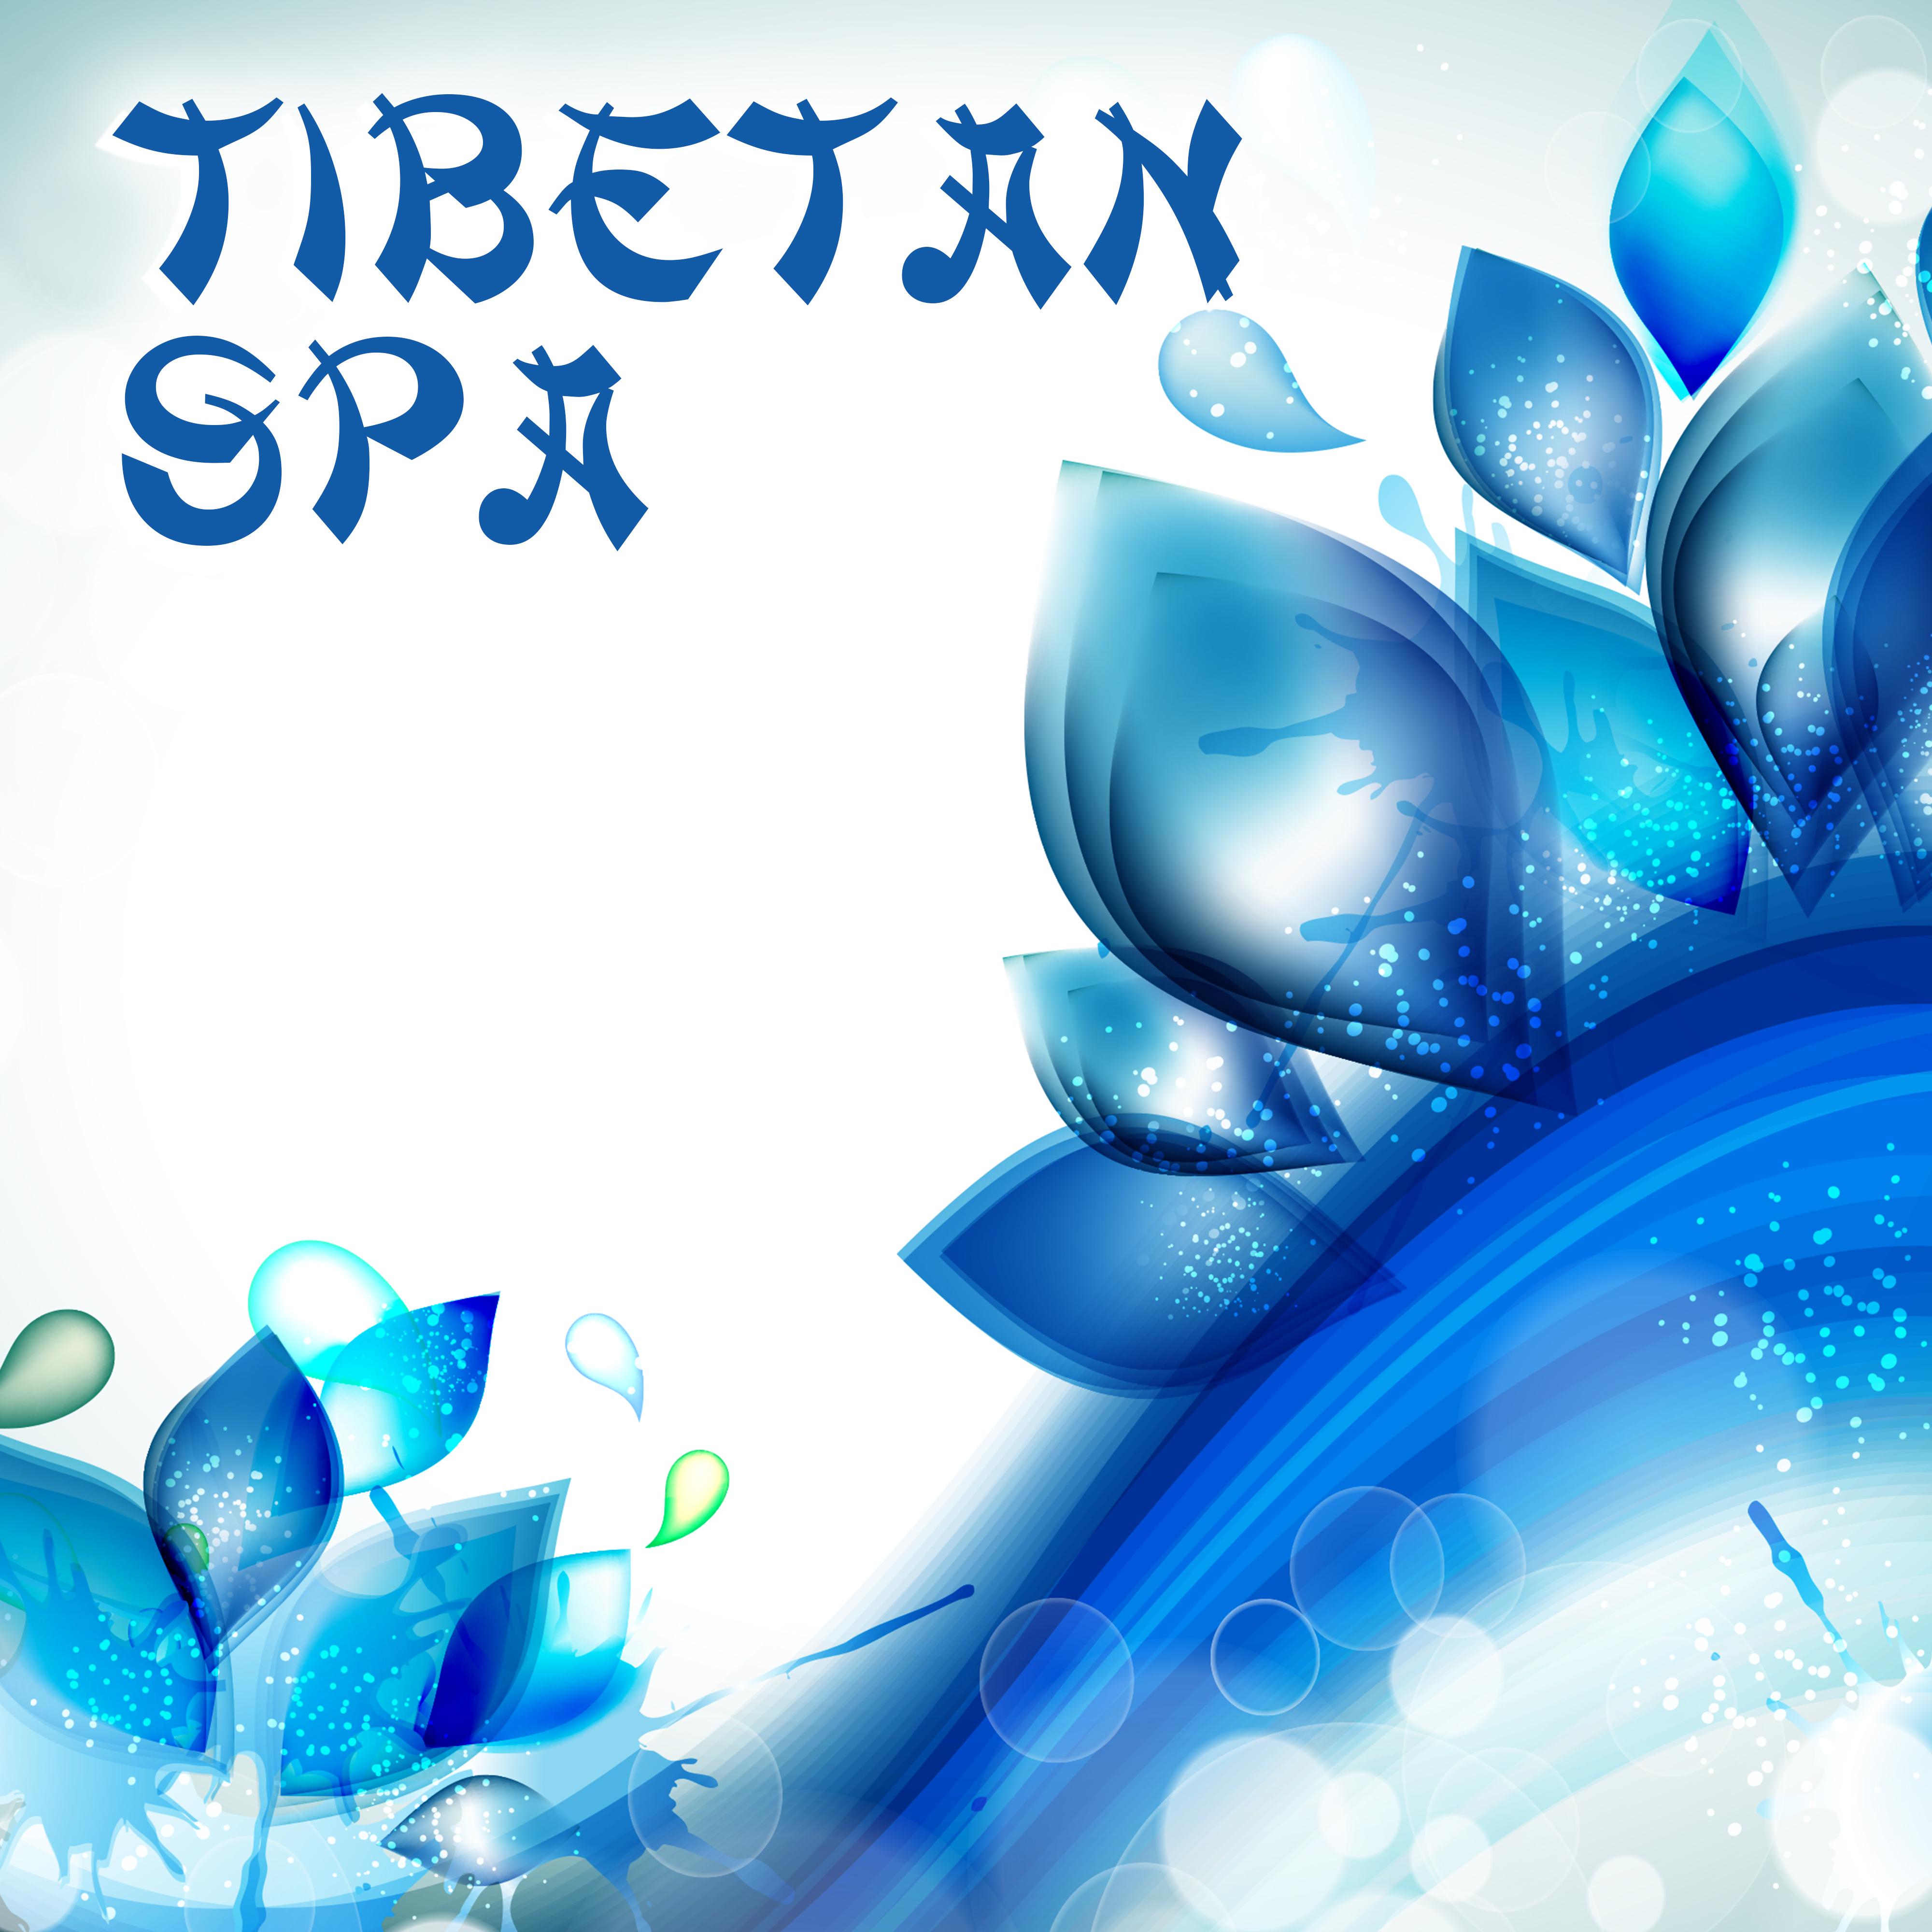 Tibetan Spa  Massage Therapy, Relaxation Wellness, Pure Mind, Oriental Sounds, Stress Relief, Zen Spa Music, Relaxing Waves, Nature Sounds